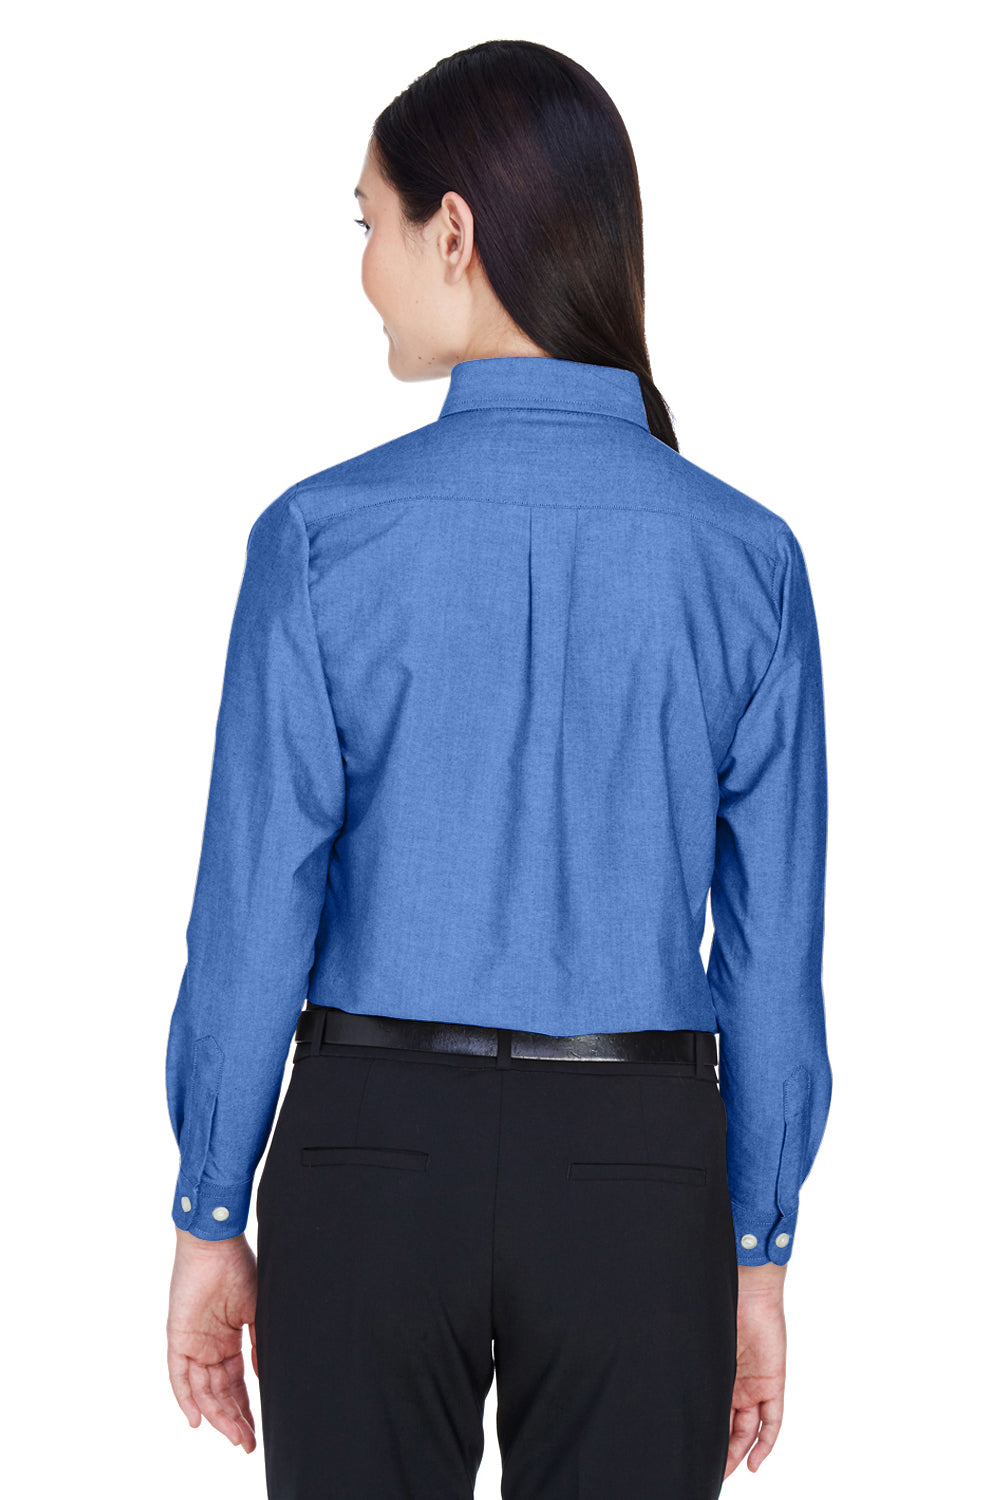 UltraClub 8990 Womens Classic Oxford Wrinkle Resistant Long Sleeve Button Down Shirt w/ Pocket French Blue Back